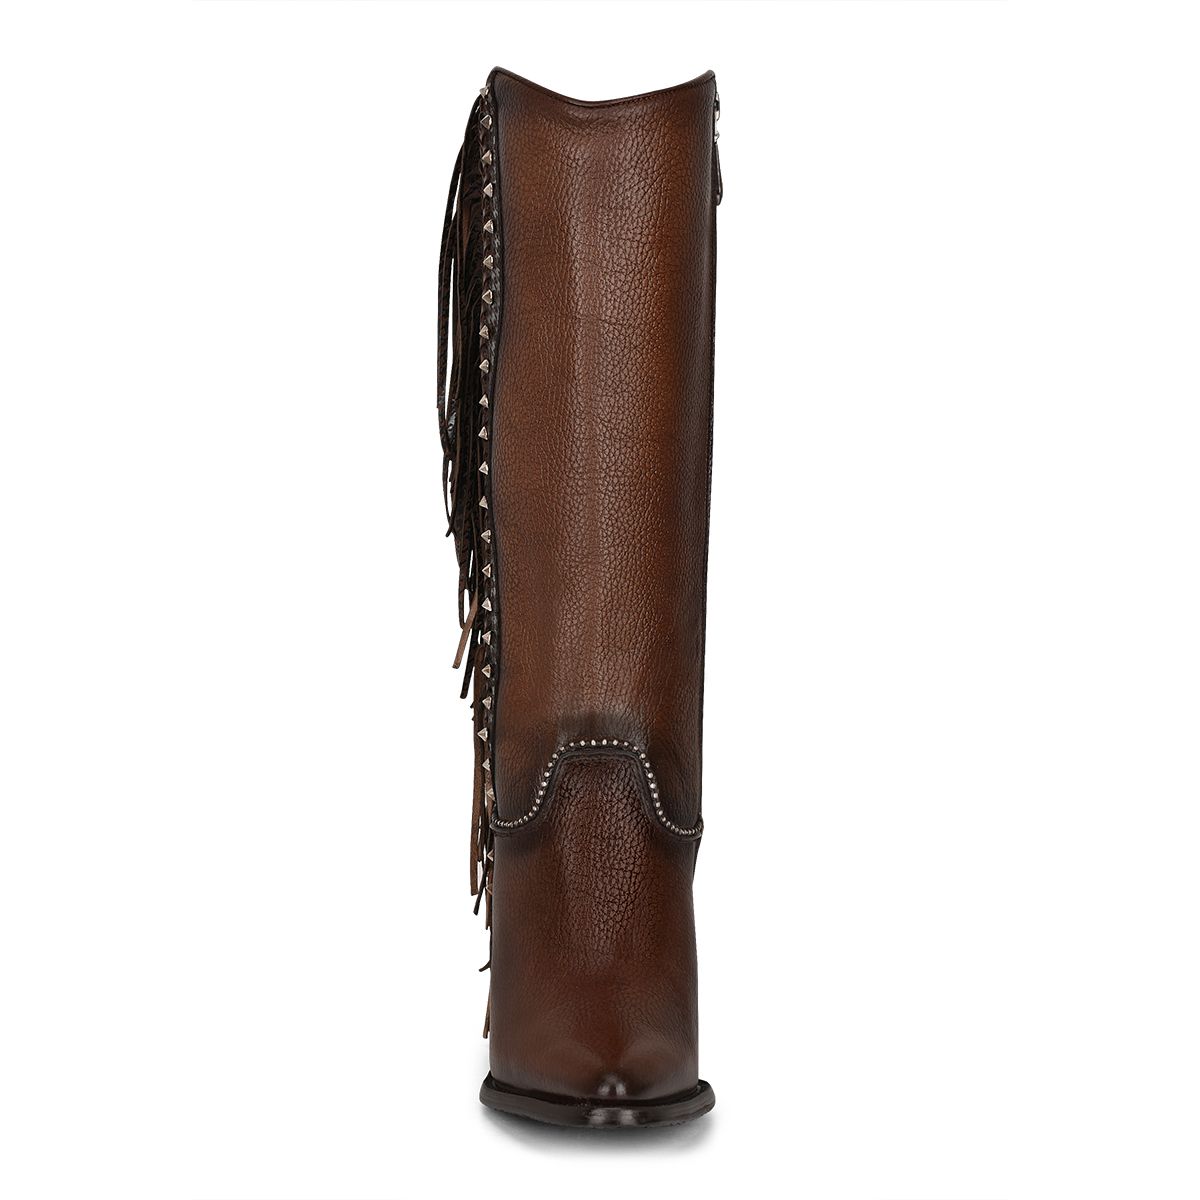 4Q03RS - Cuadra brown casual fashion cowhide leather strapped boots for women-CUADRA-Kuet-Cuadra-Boots